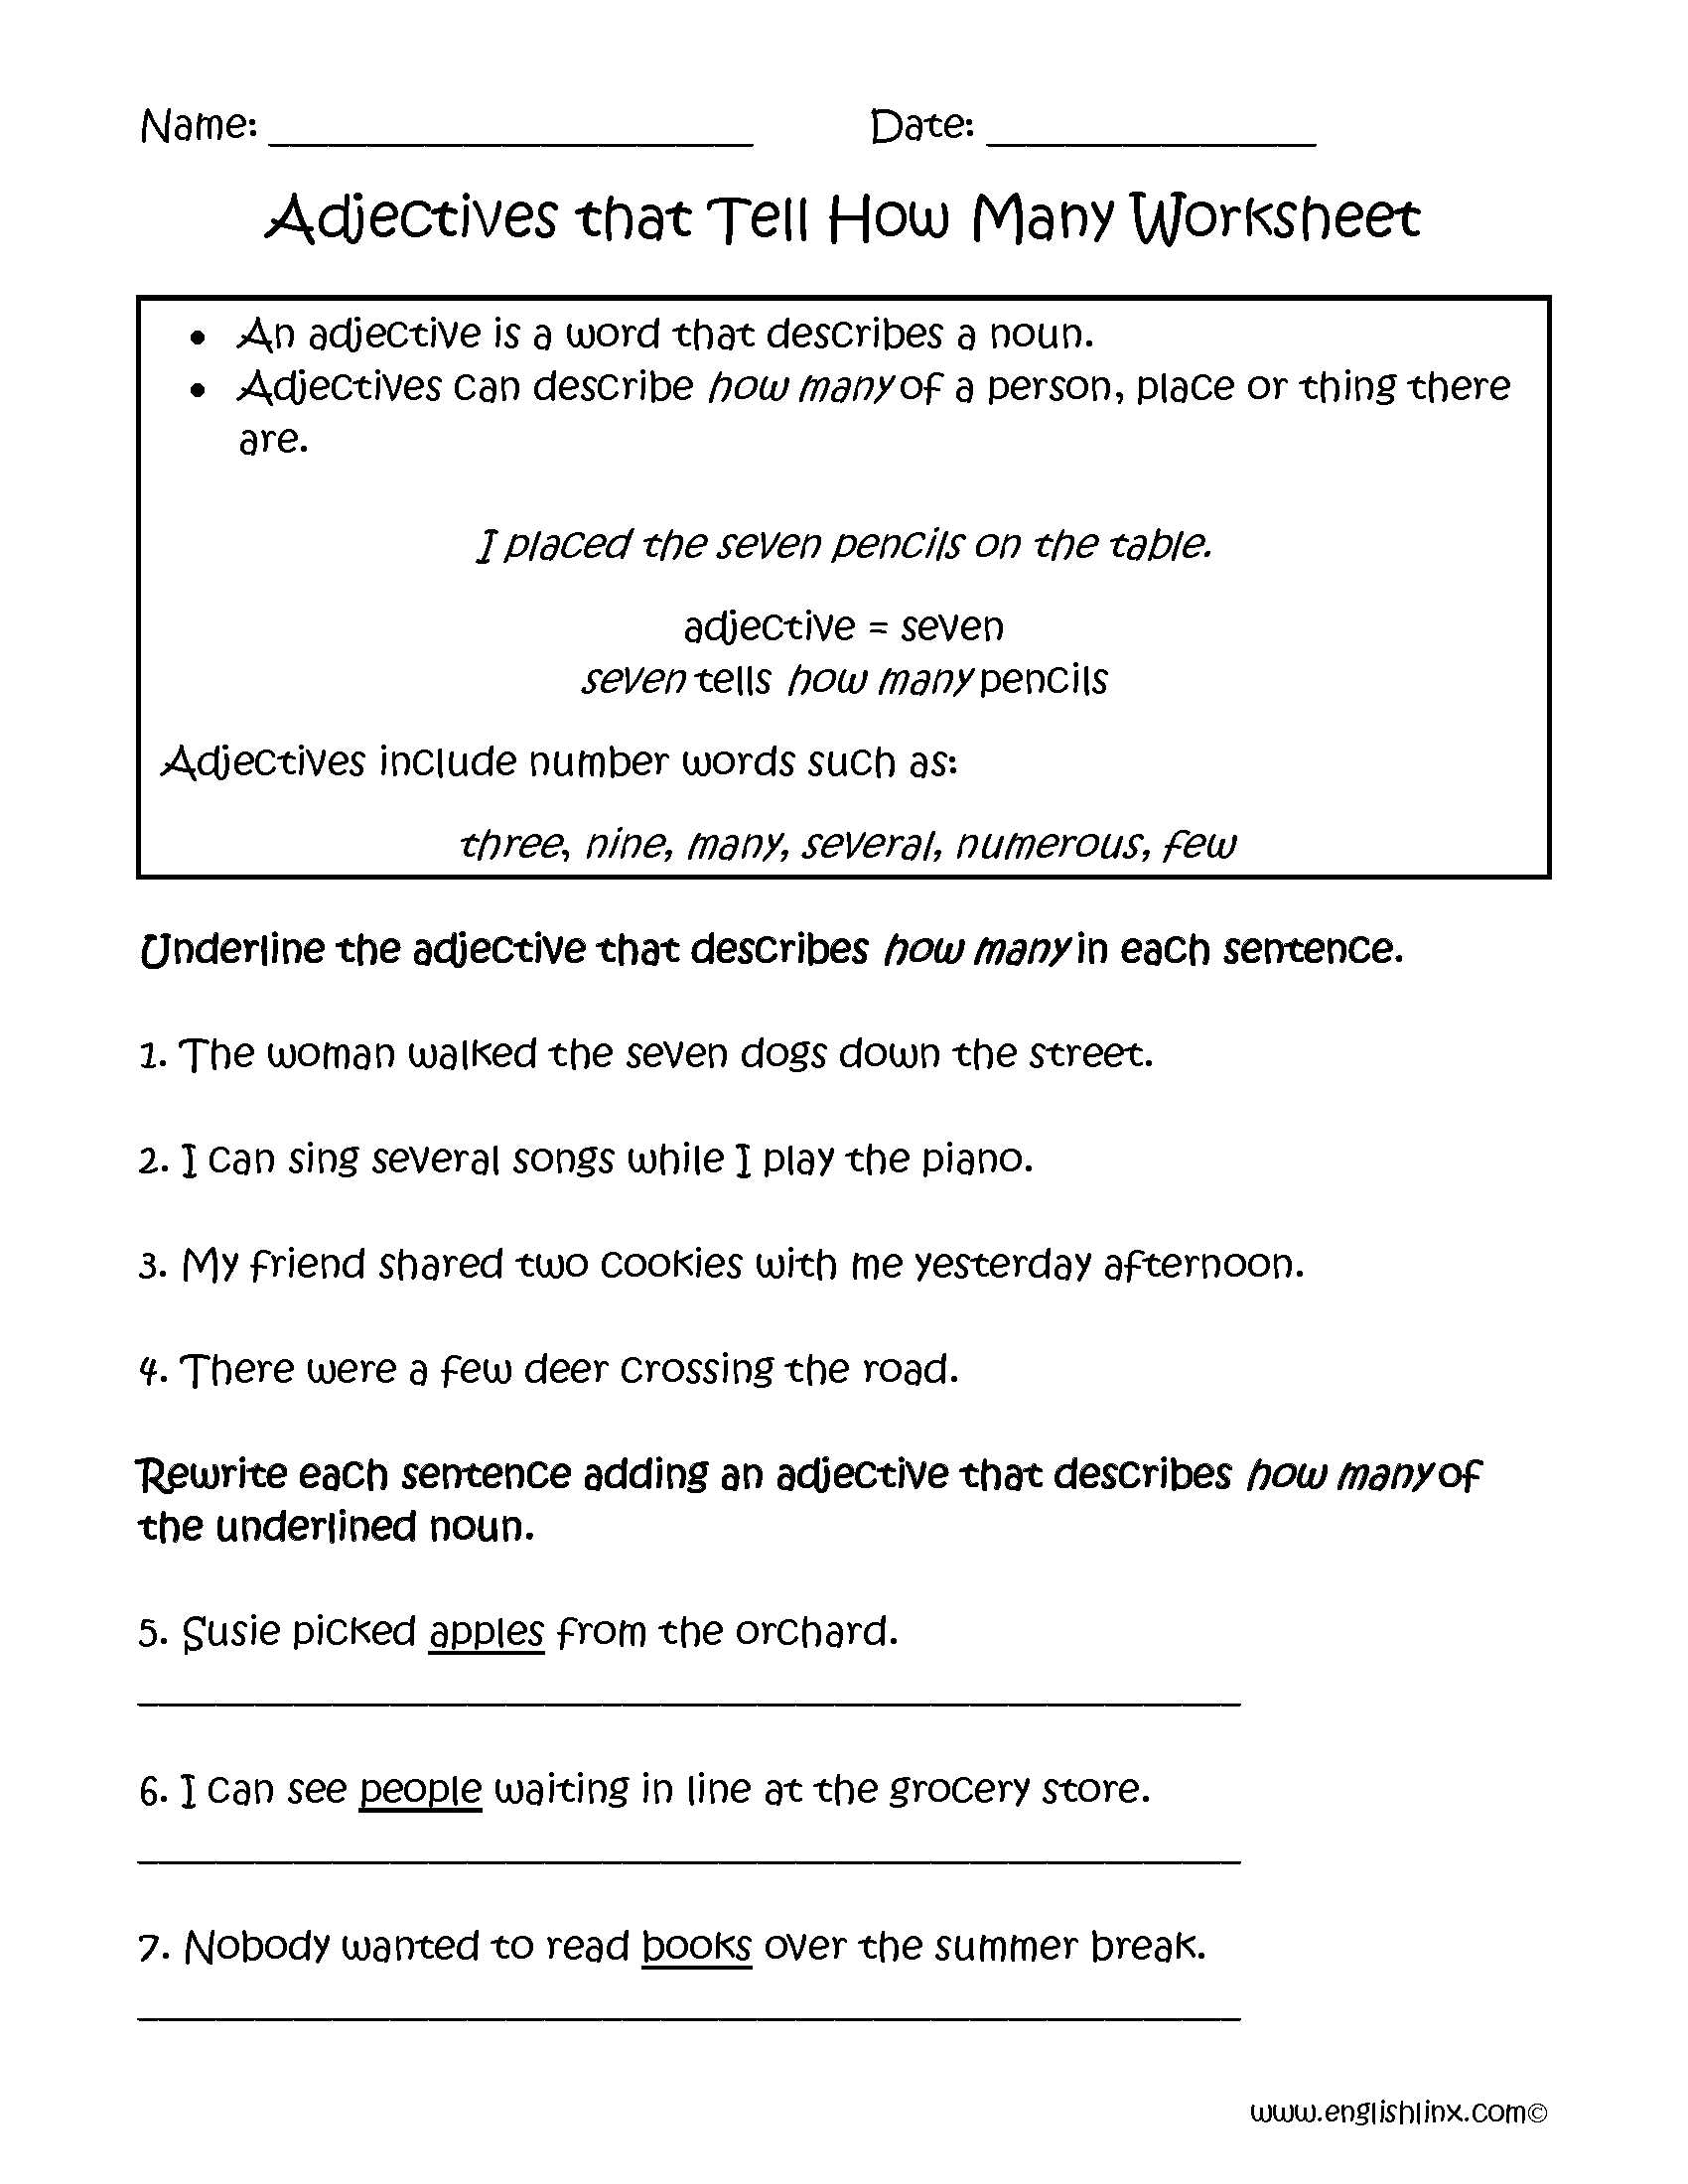 Subject Verb Agreement Practice Worksheets or Adjectives Tell How Many Worksheets